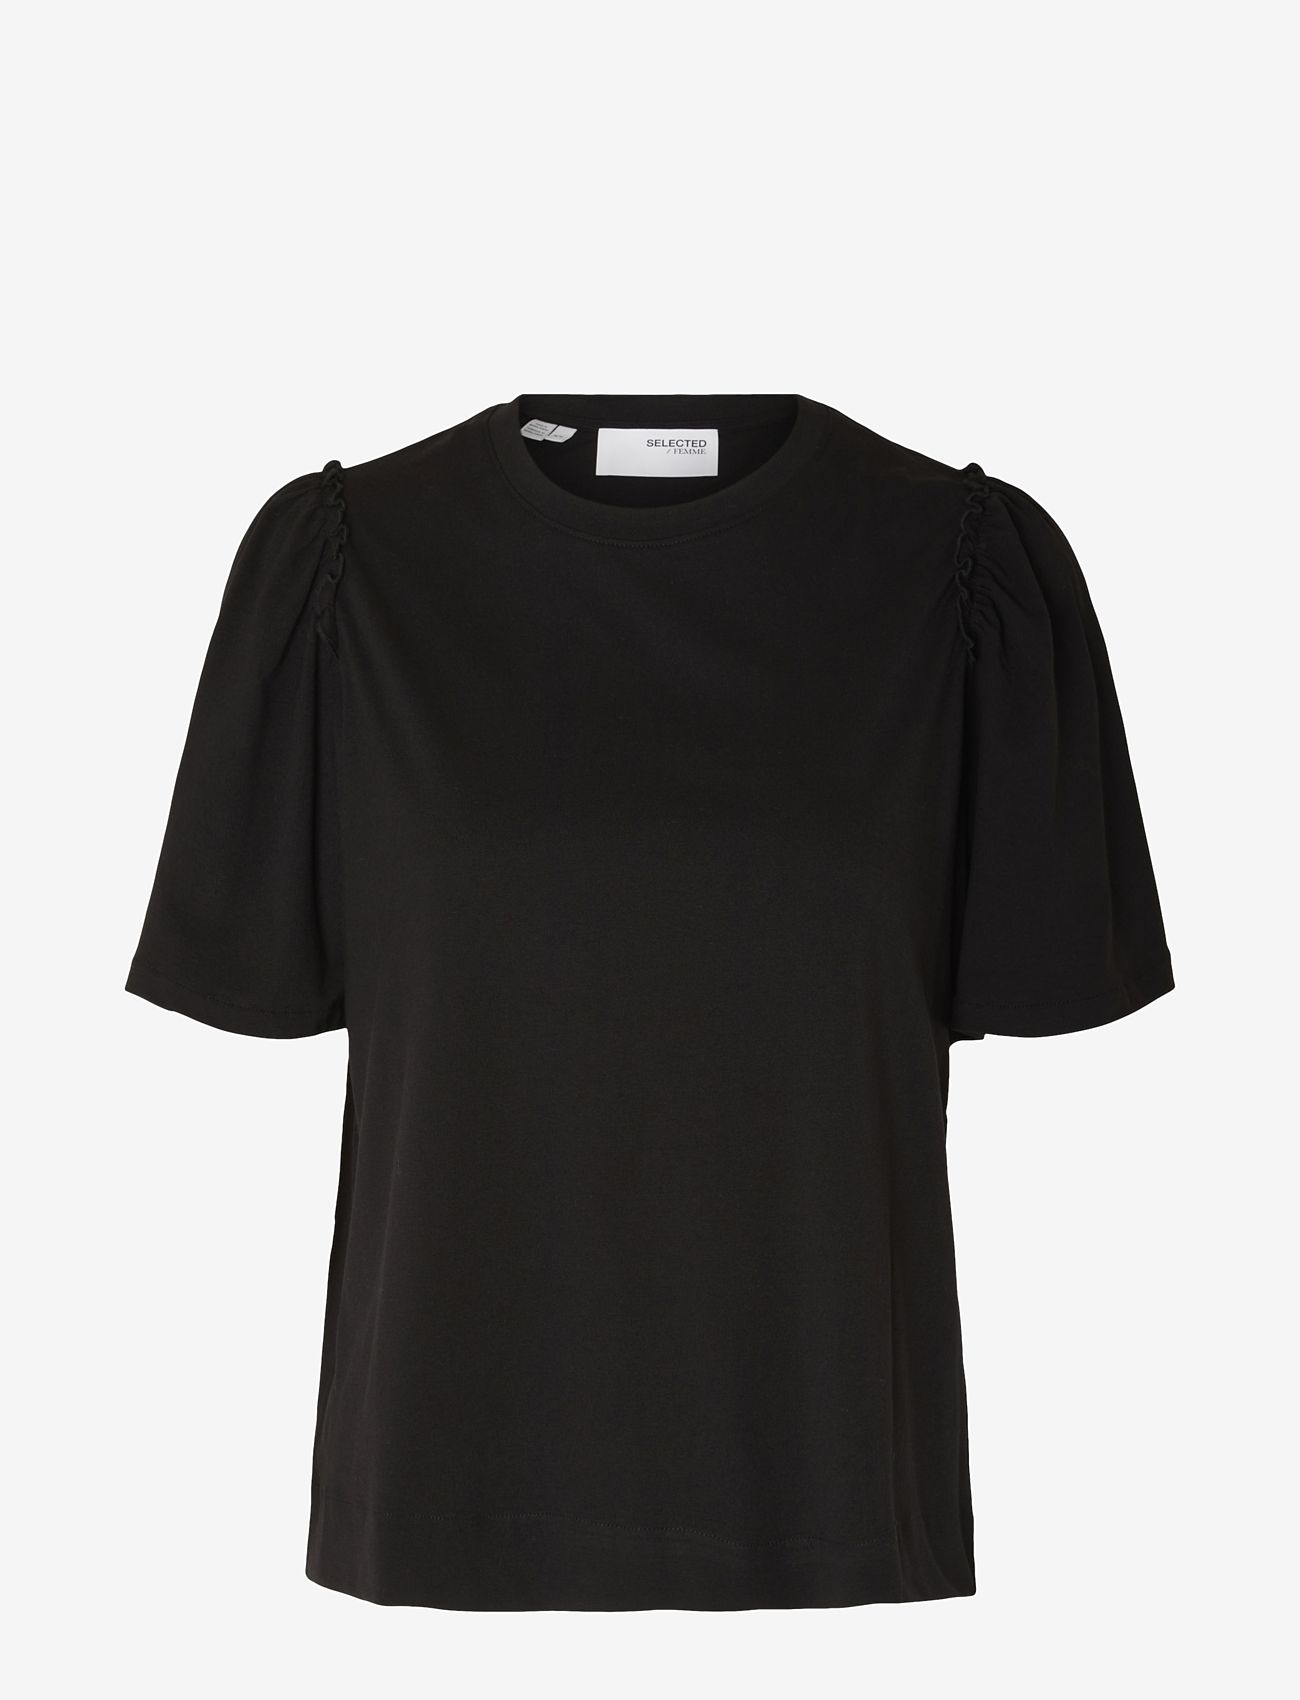 Selected Femme - SLFPENELOPE 2/4 RUFFLE TEE - lowest prices - black - 0